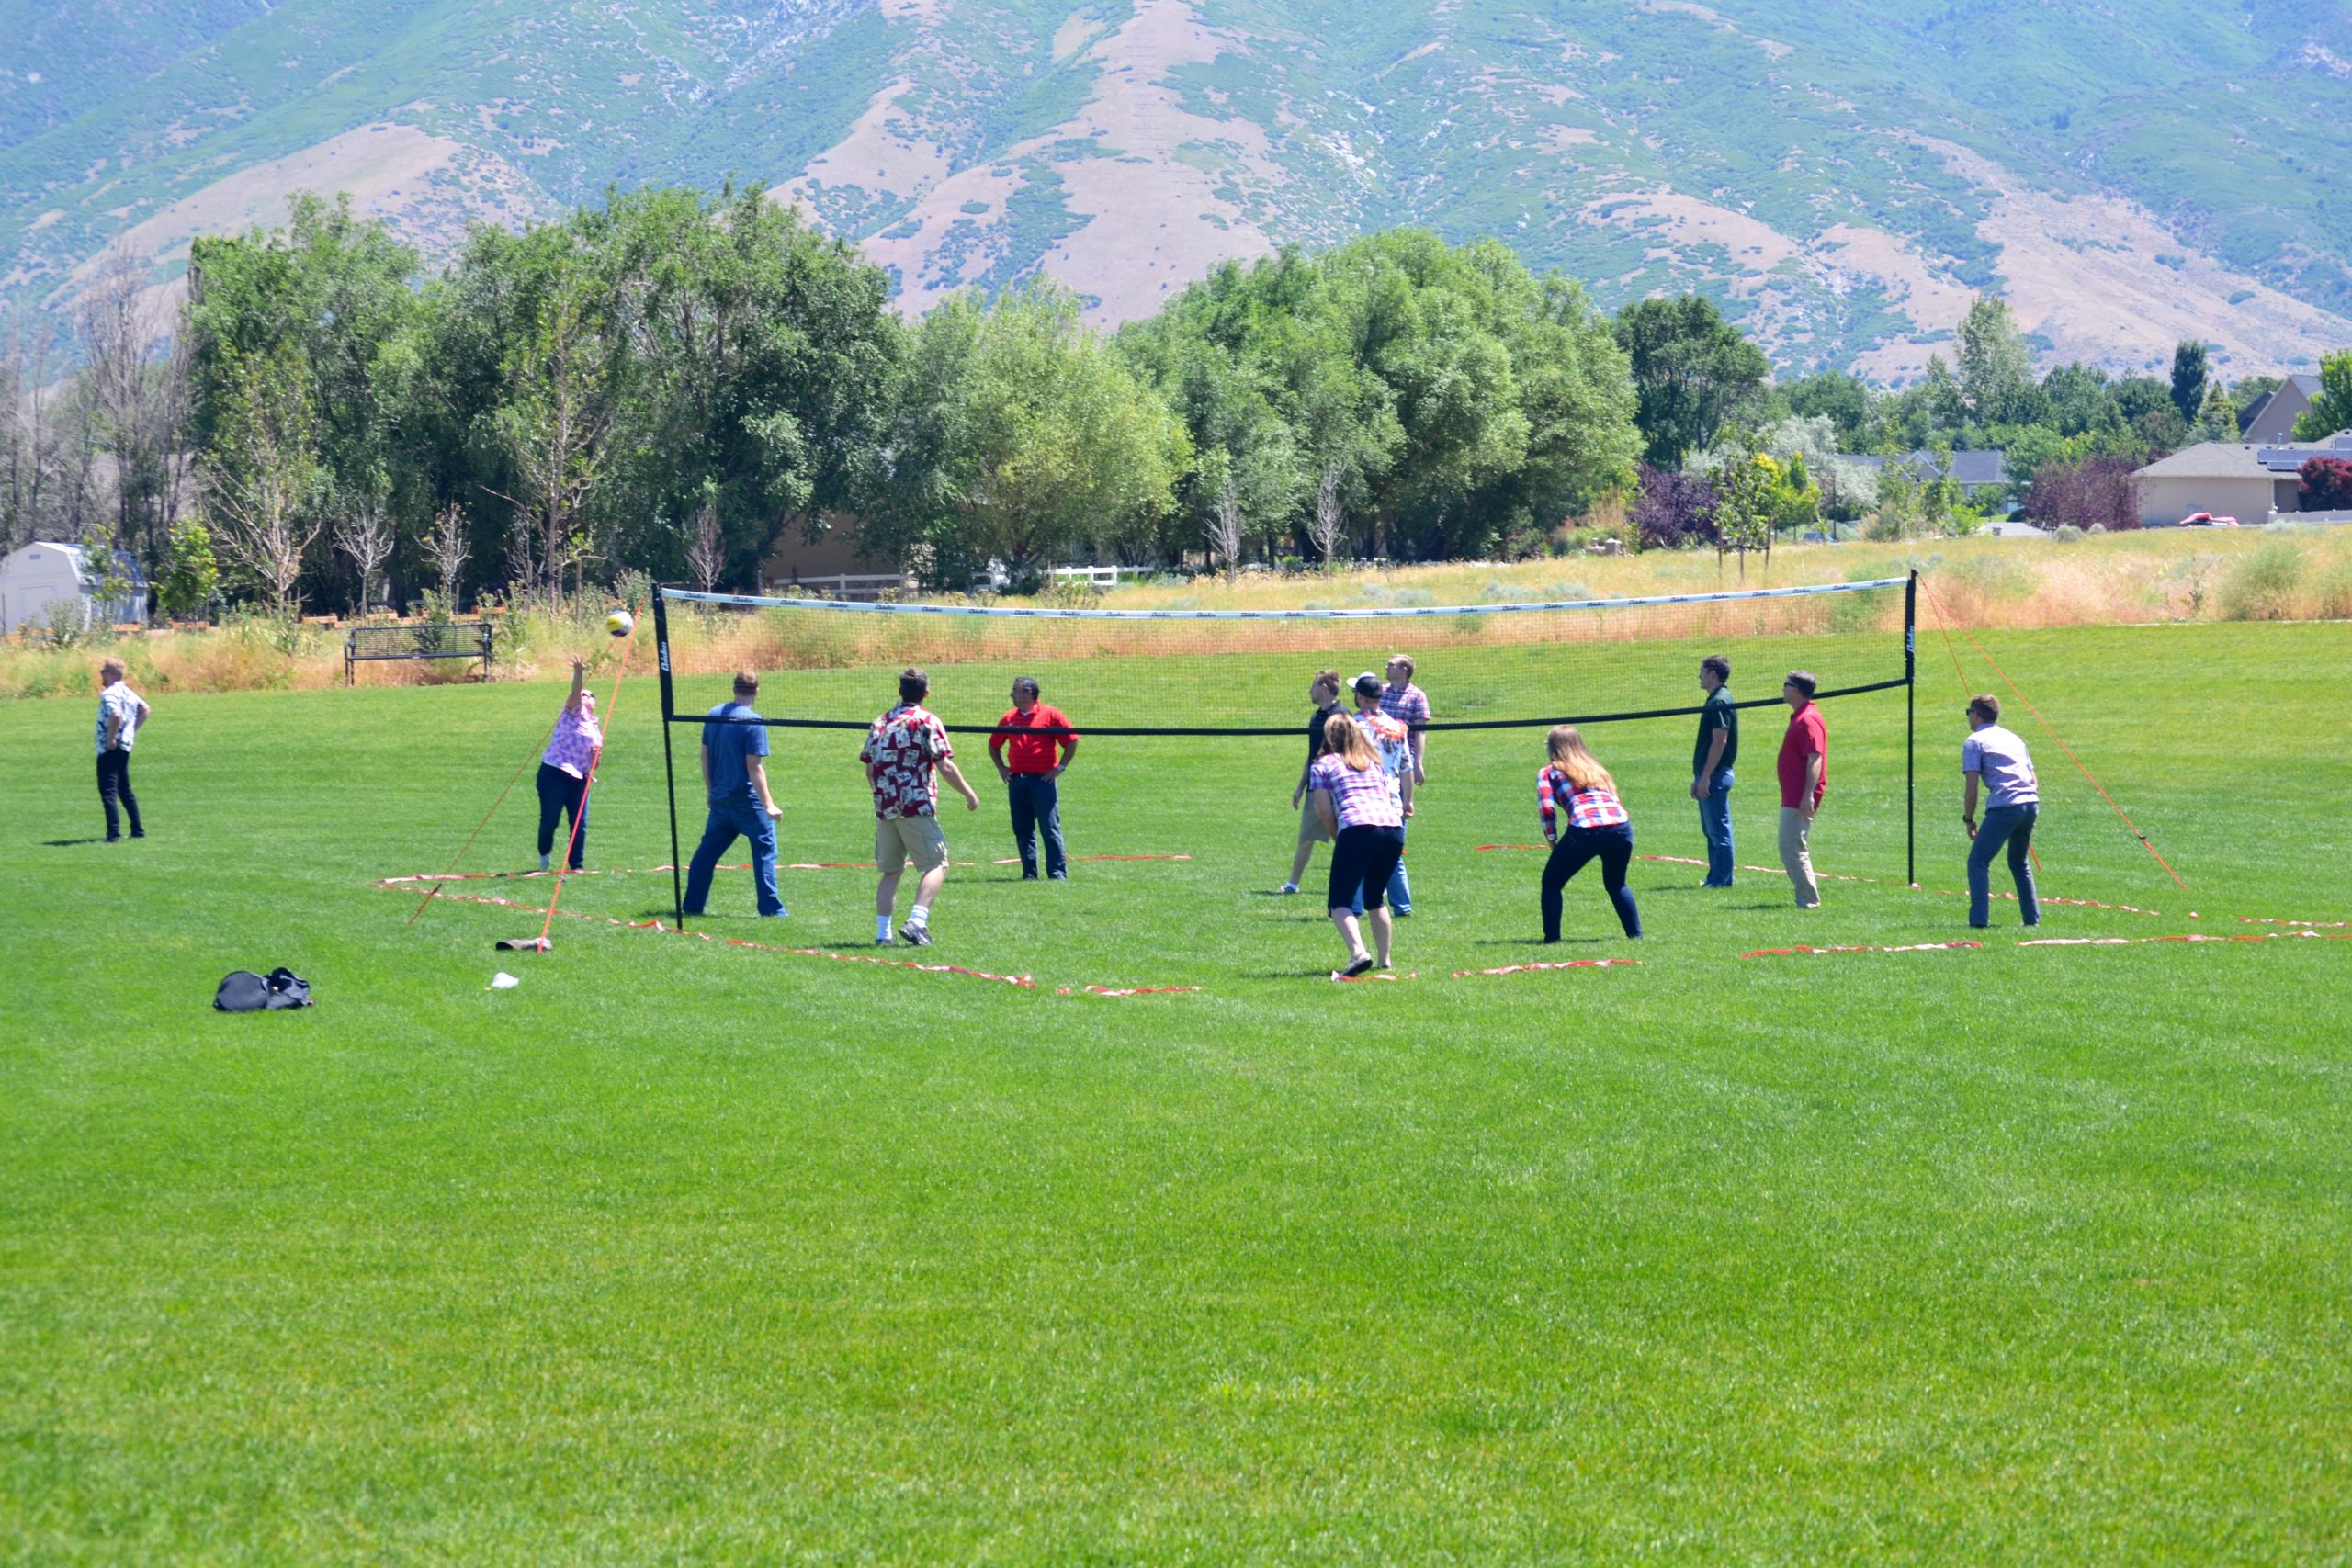 Group of people playing volleyball in grass field.